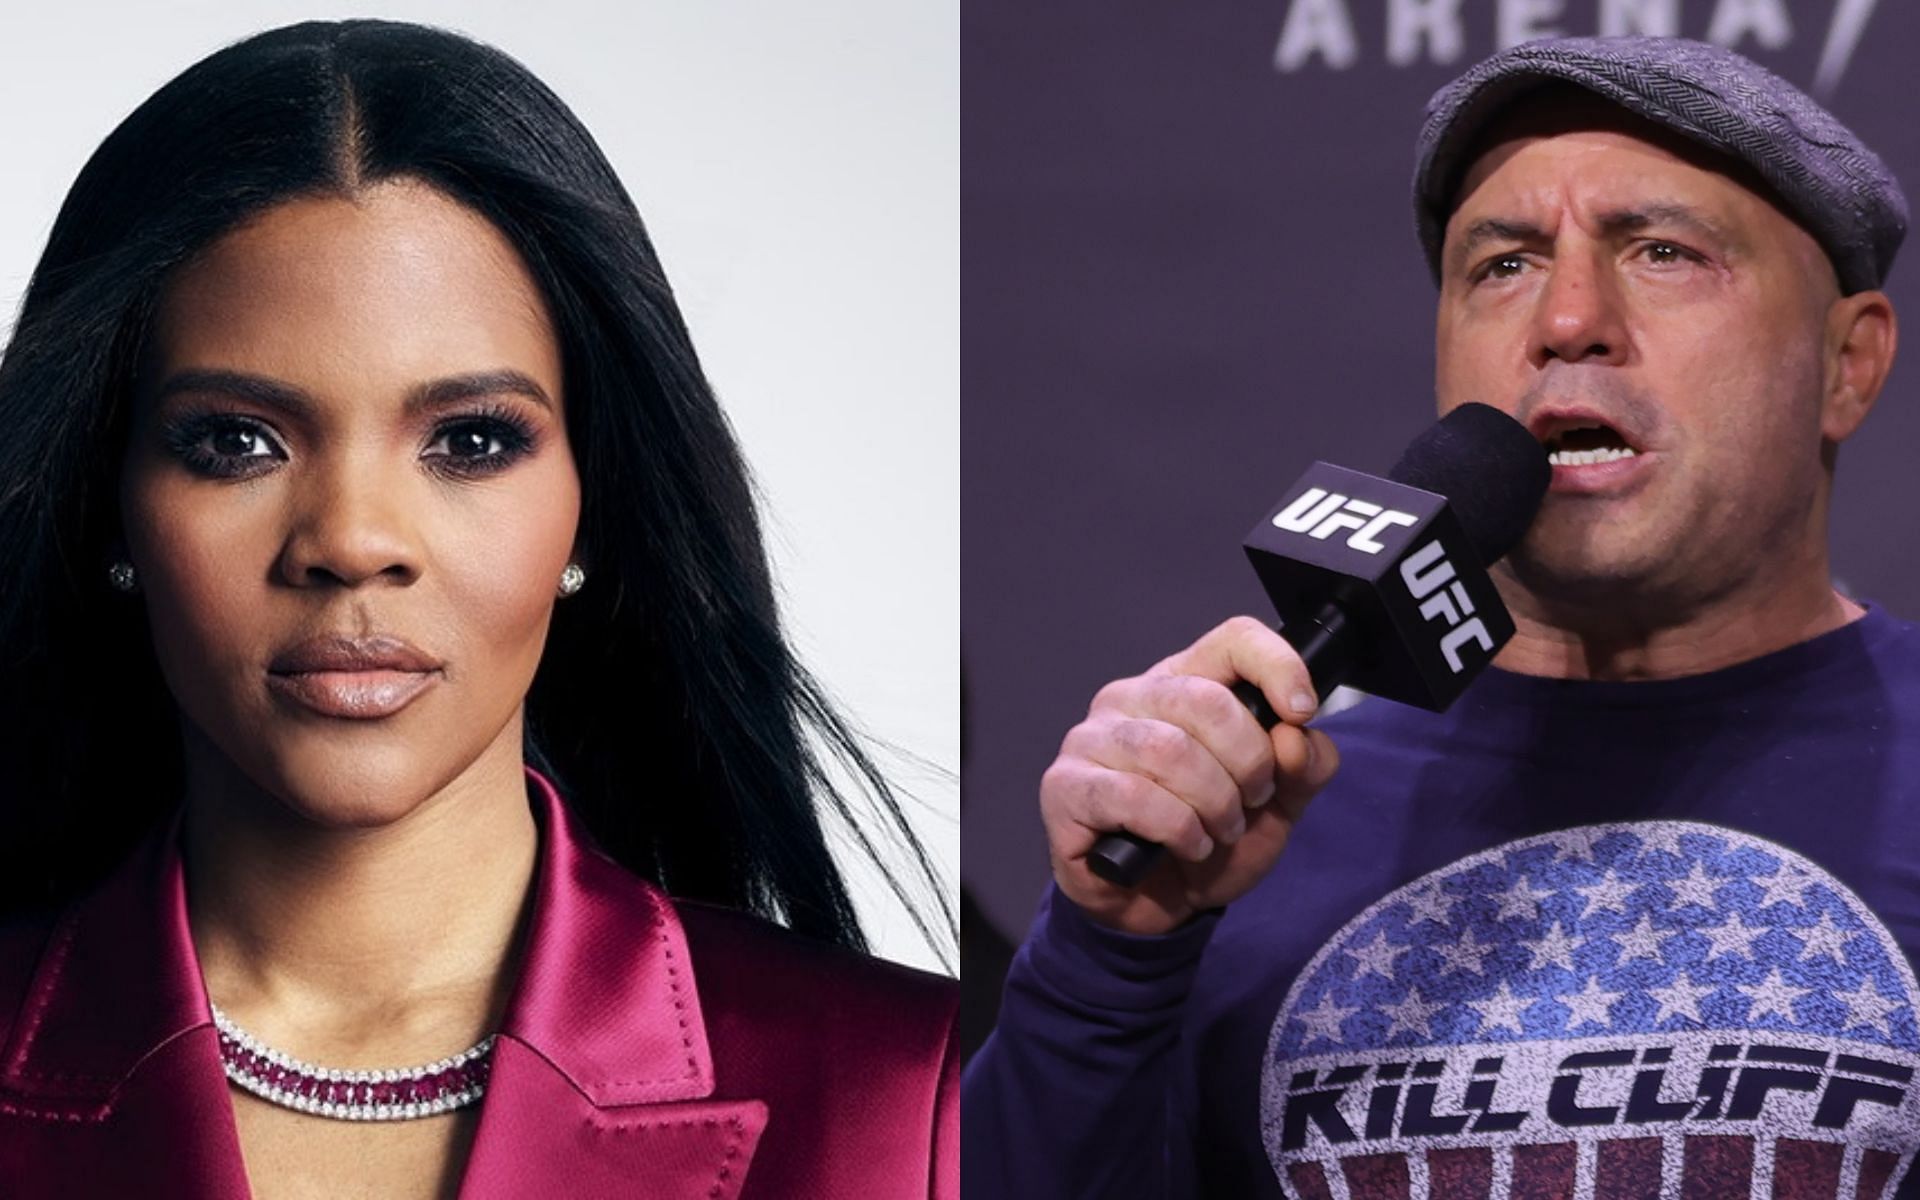 Candace Owens (left, via Facebook @Candace Owens) and Joe Rogan (right)